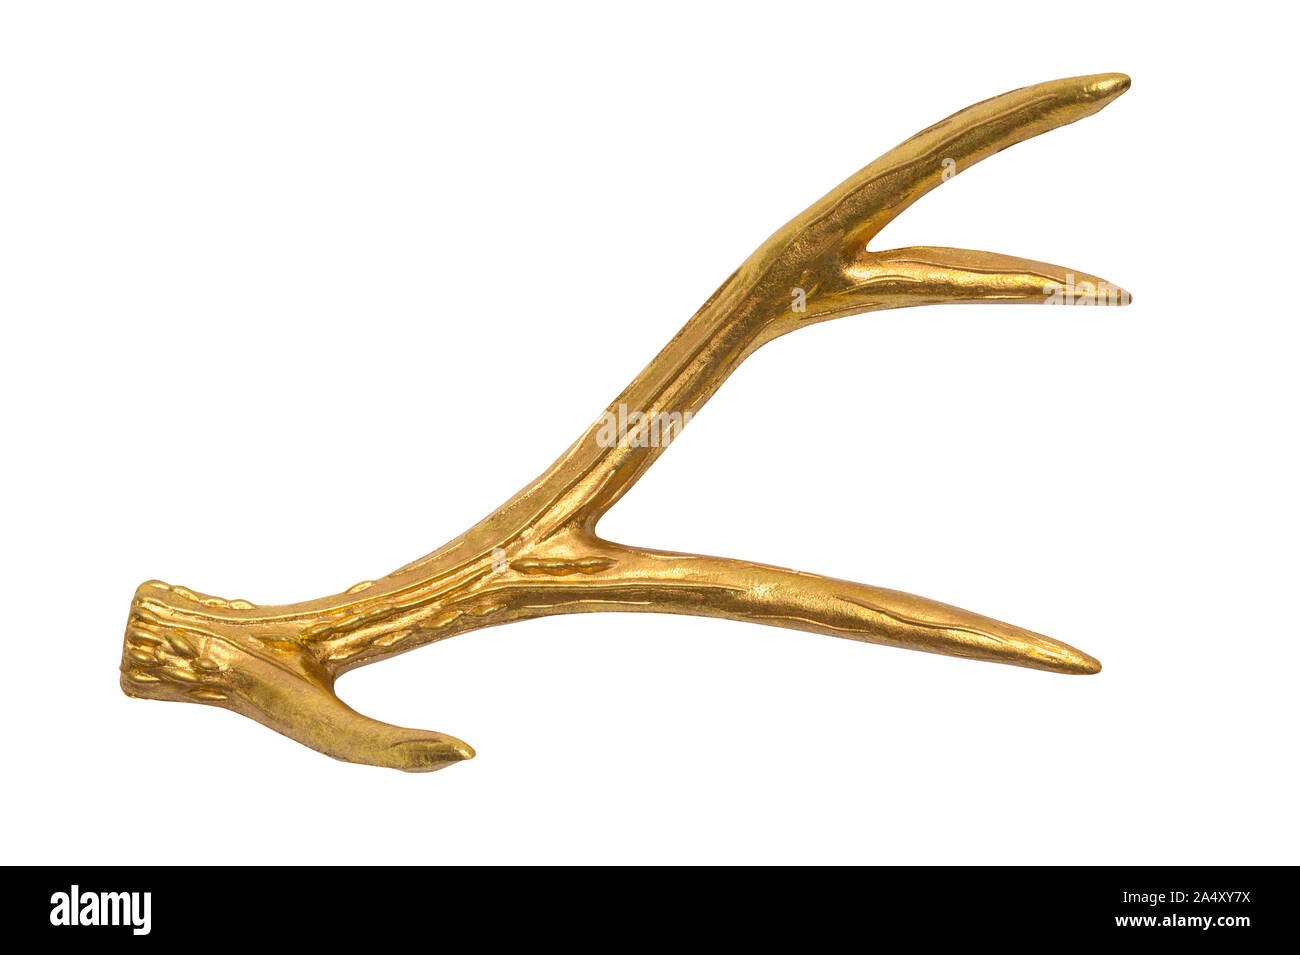 Single Gold Antler Cut Out on White. Stock Photo